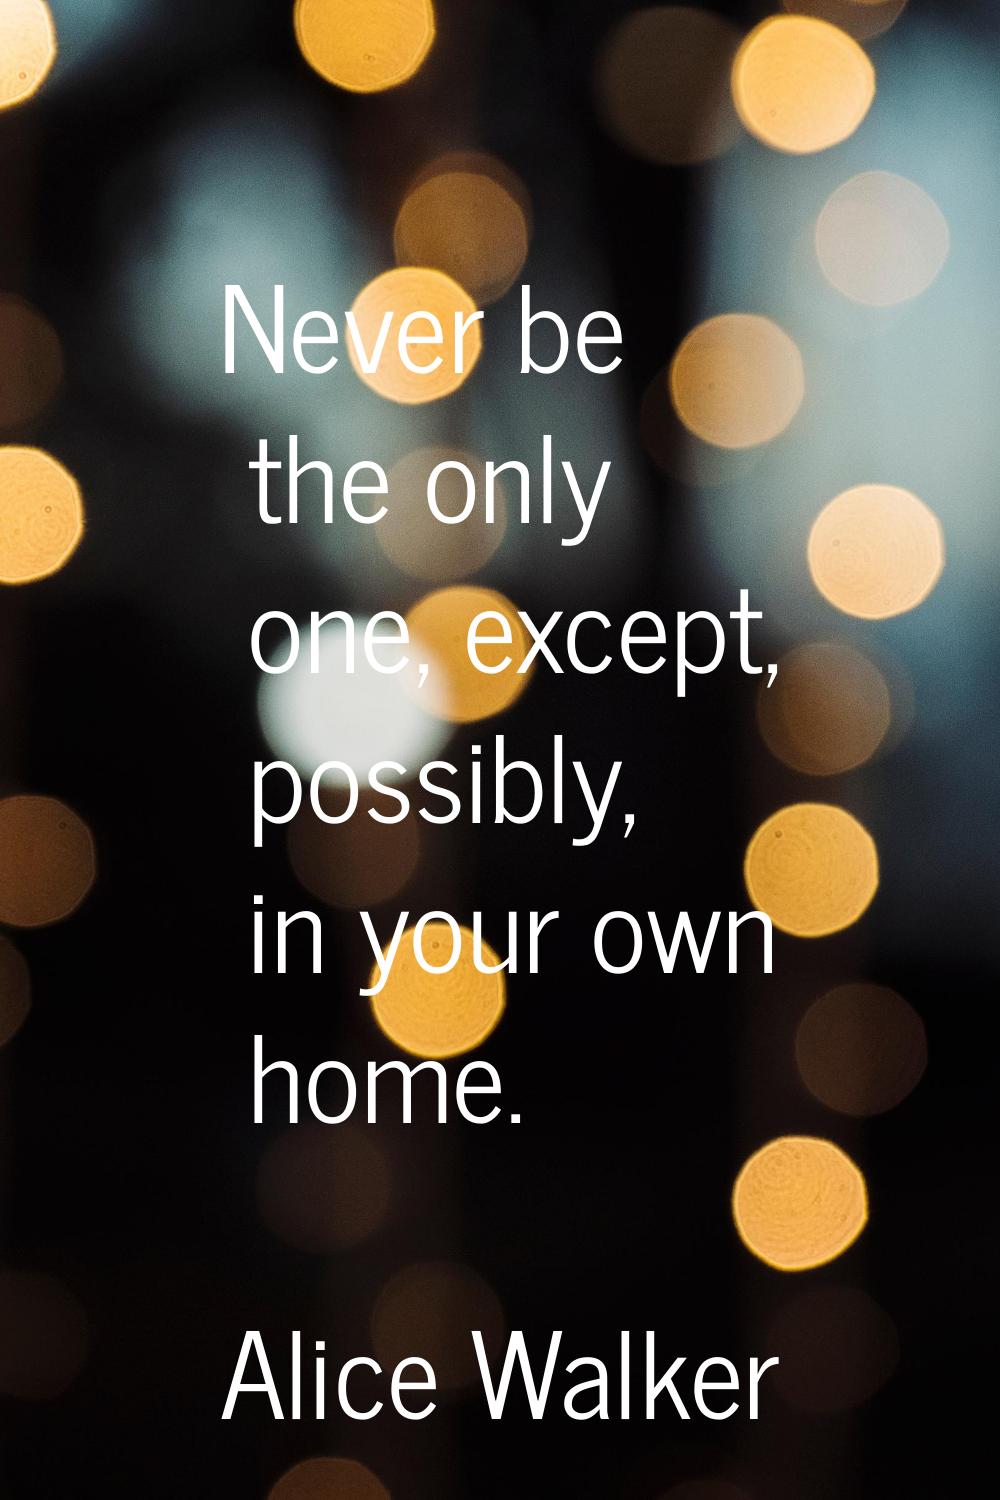 Never be the only one, except, possibly, in your own home.